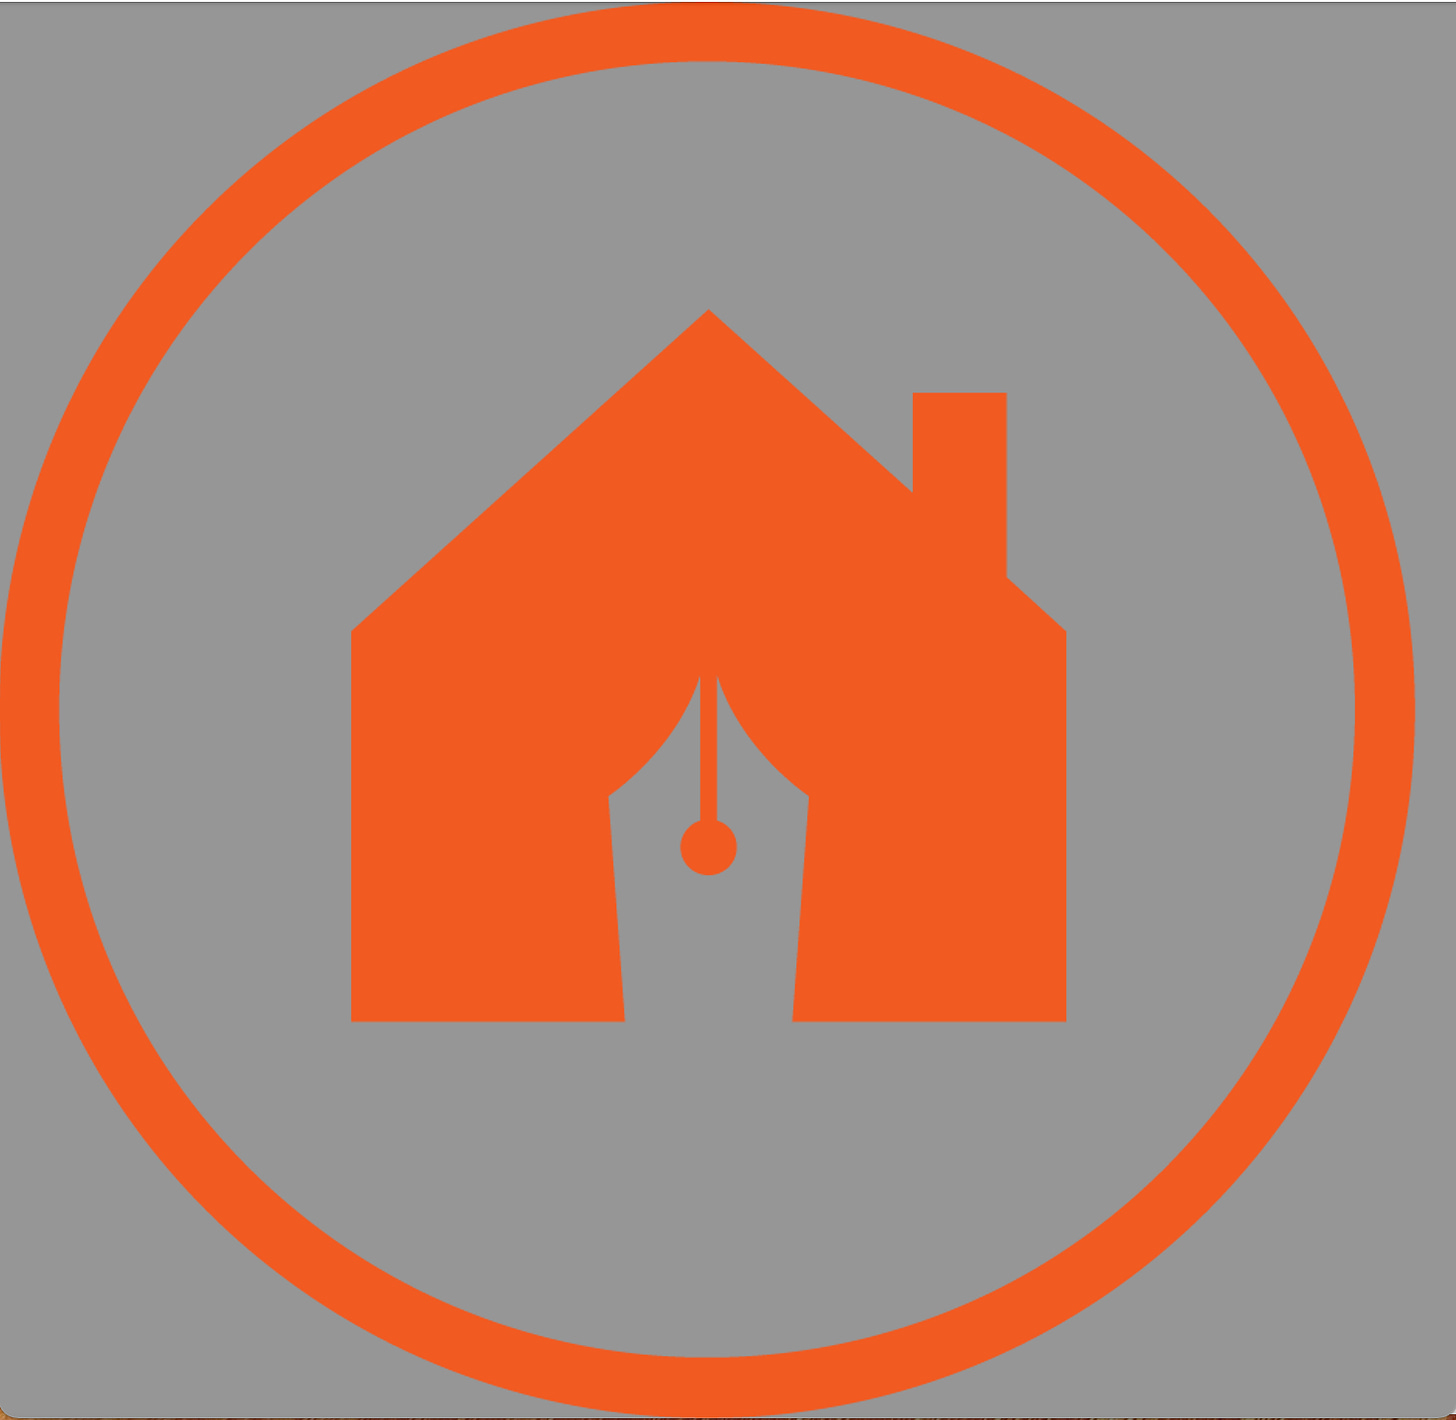 Orange circle around an orange house. the door of the house is the shape of a pen pointing upwards. The logo represents the company Writers' Haven, created by memoir coach Christine Wolf.